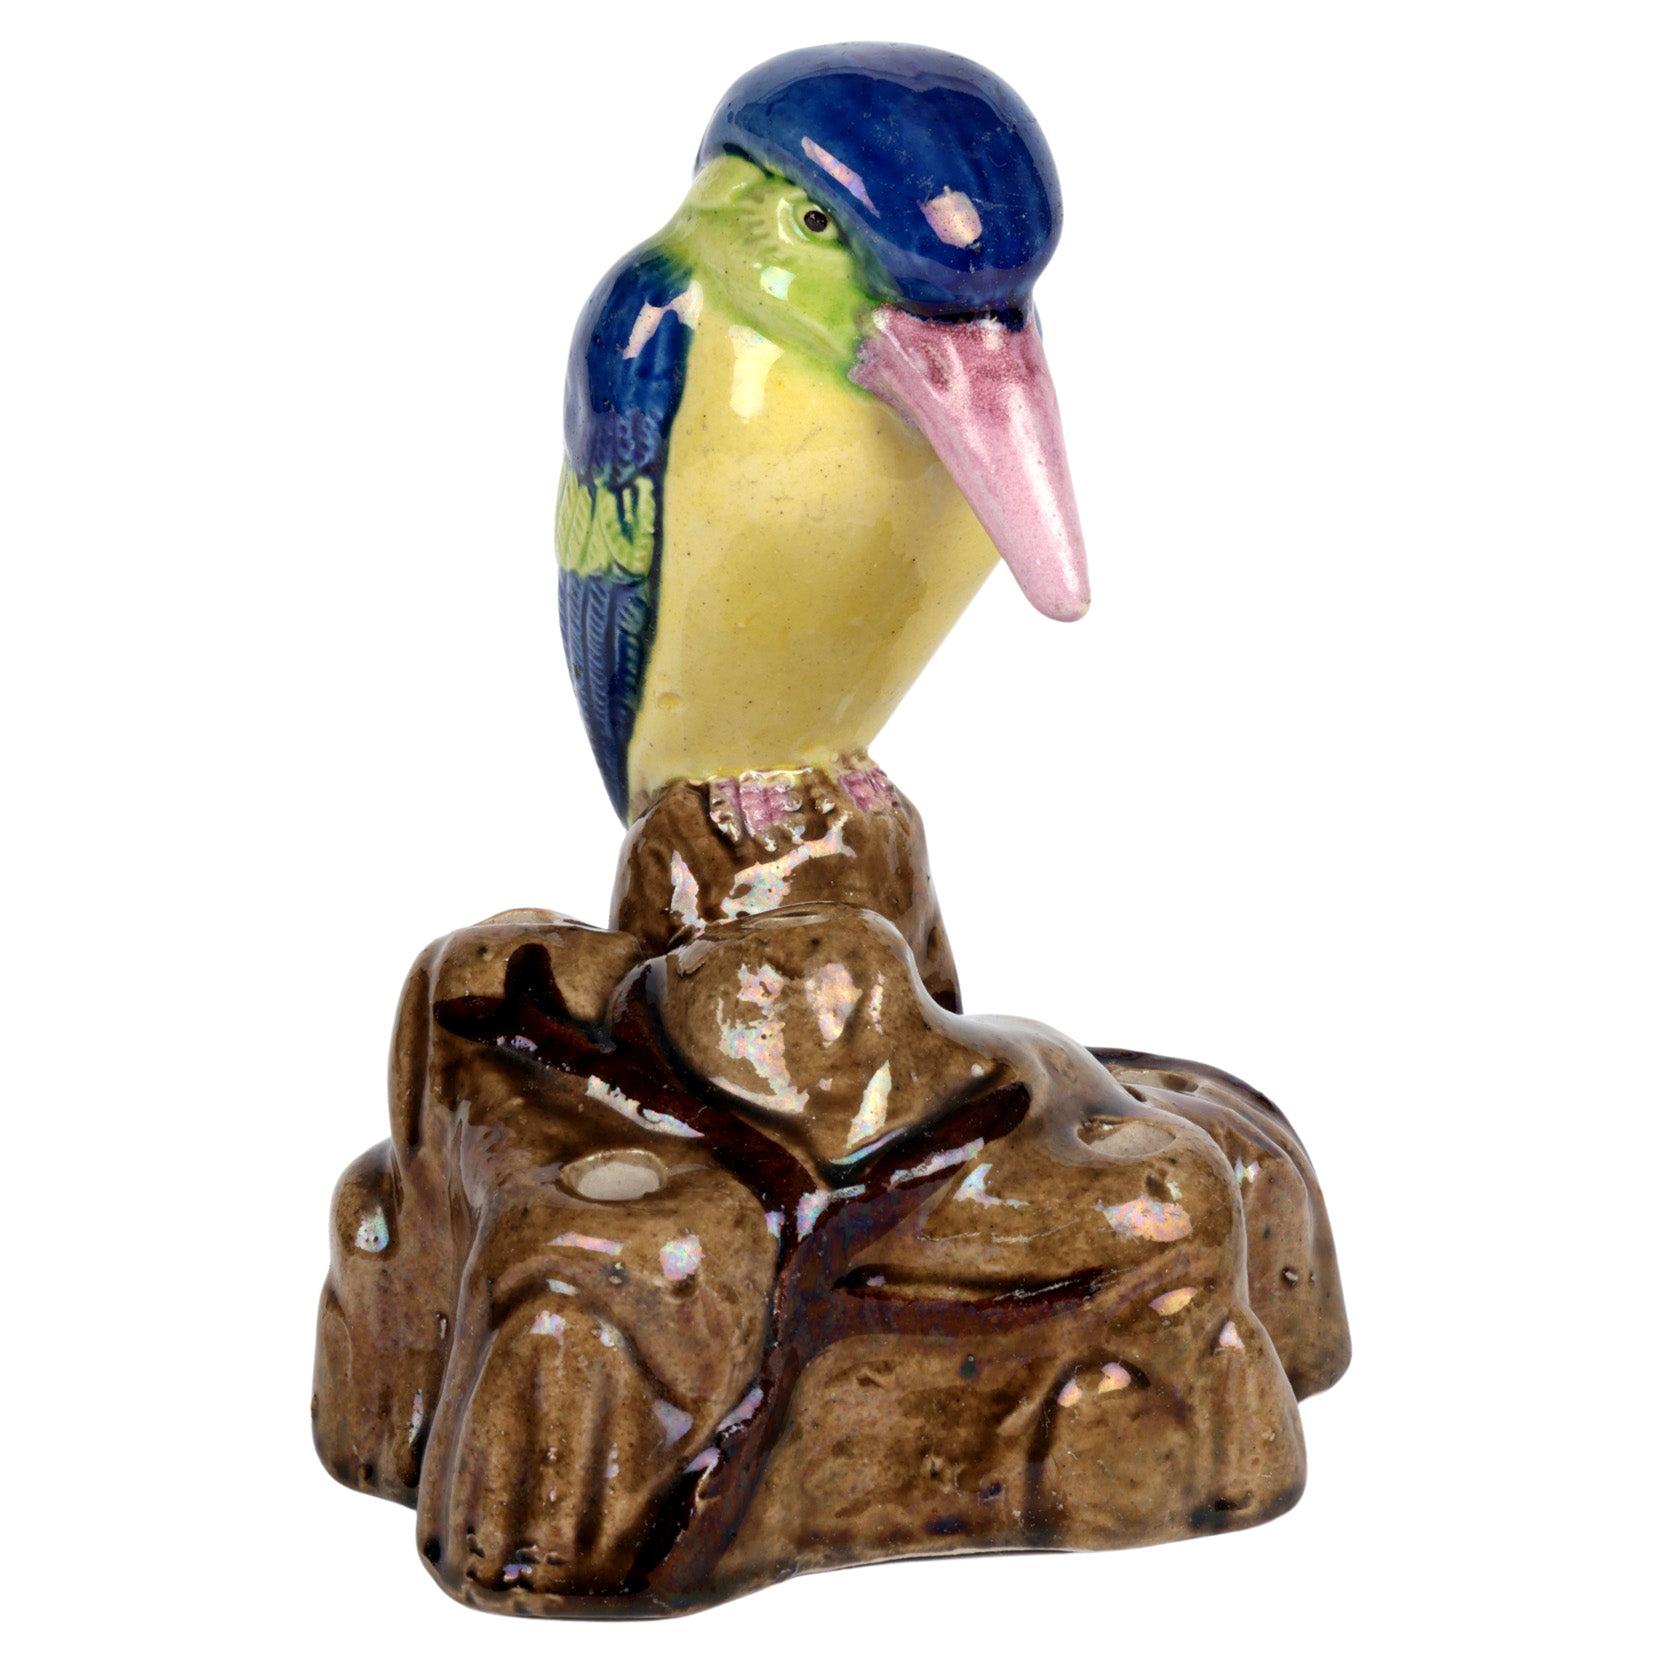 Japanese Banko Ware Art Deco Crested Bird Mounted Pottery Hatpin Holder For Sale